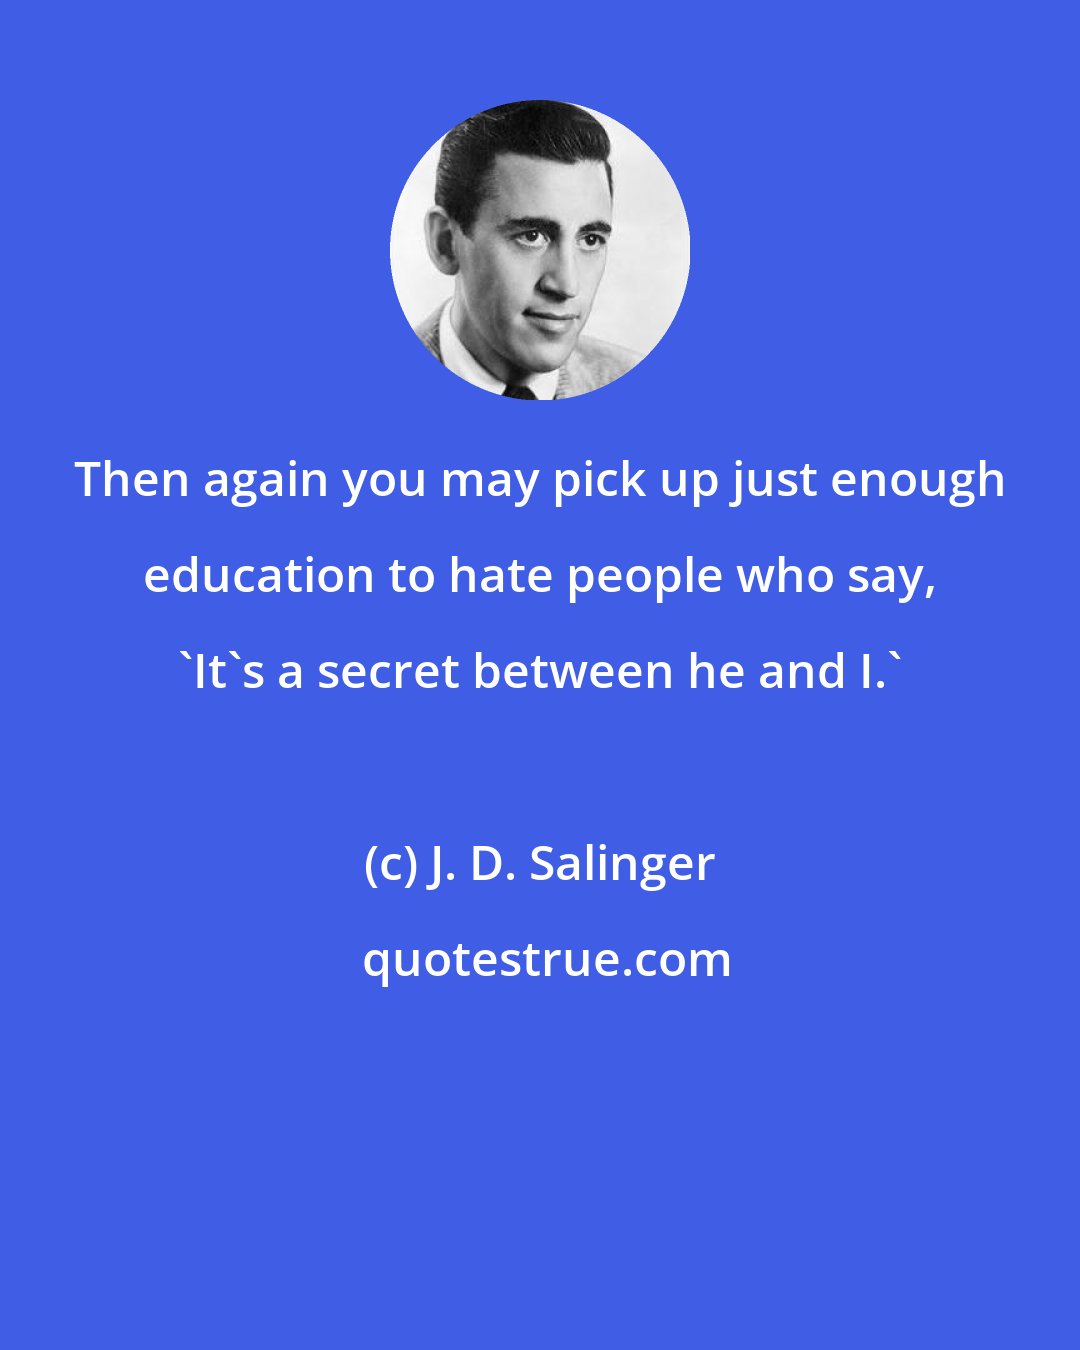 J. D. Salinger: Then again you may pick up just enough education to hate people who say, 'It's a secret between he and I.'